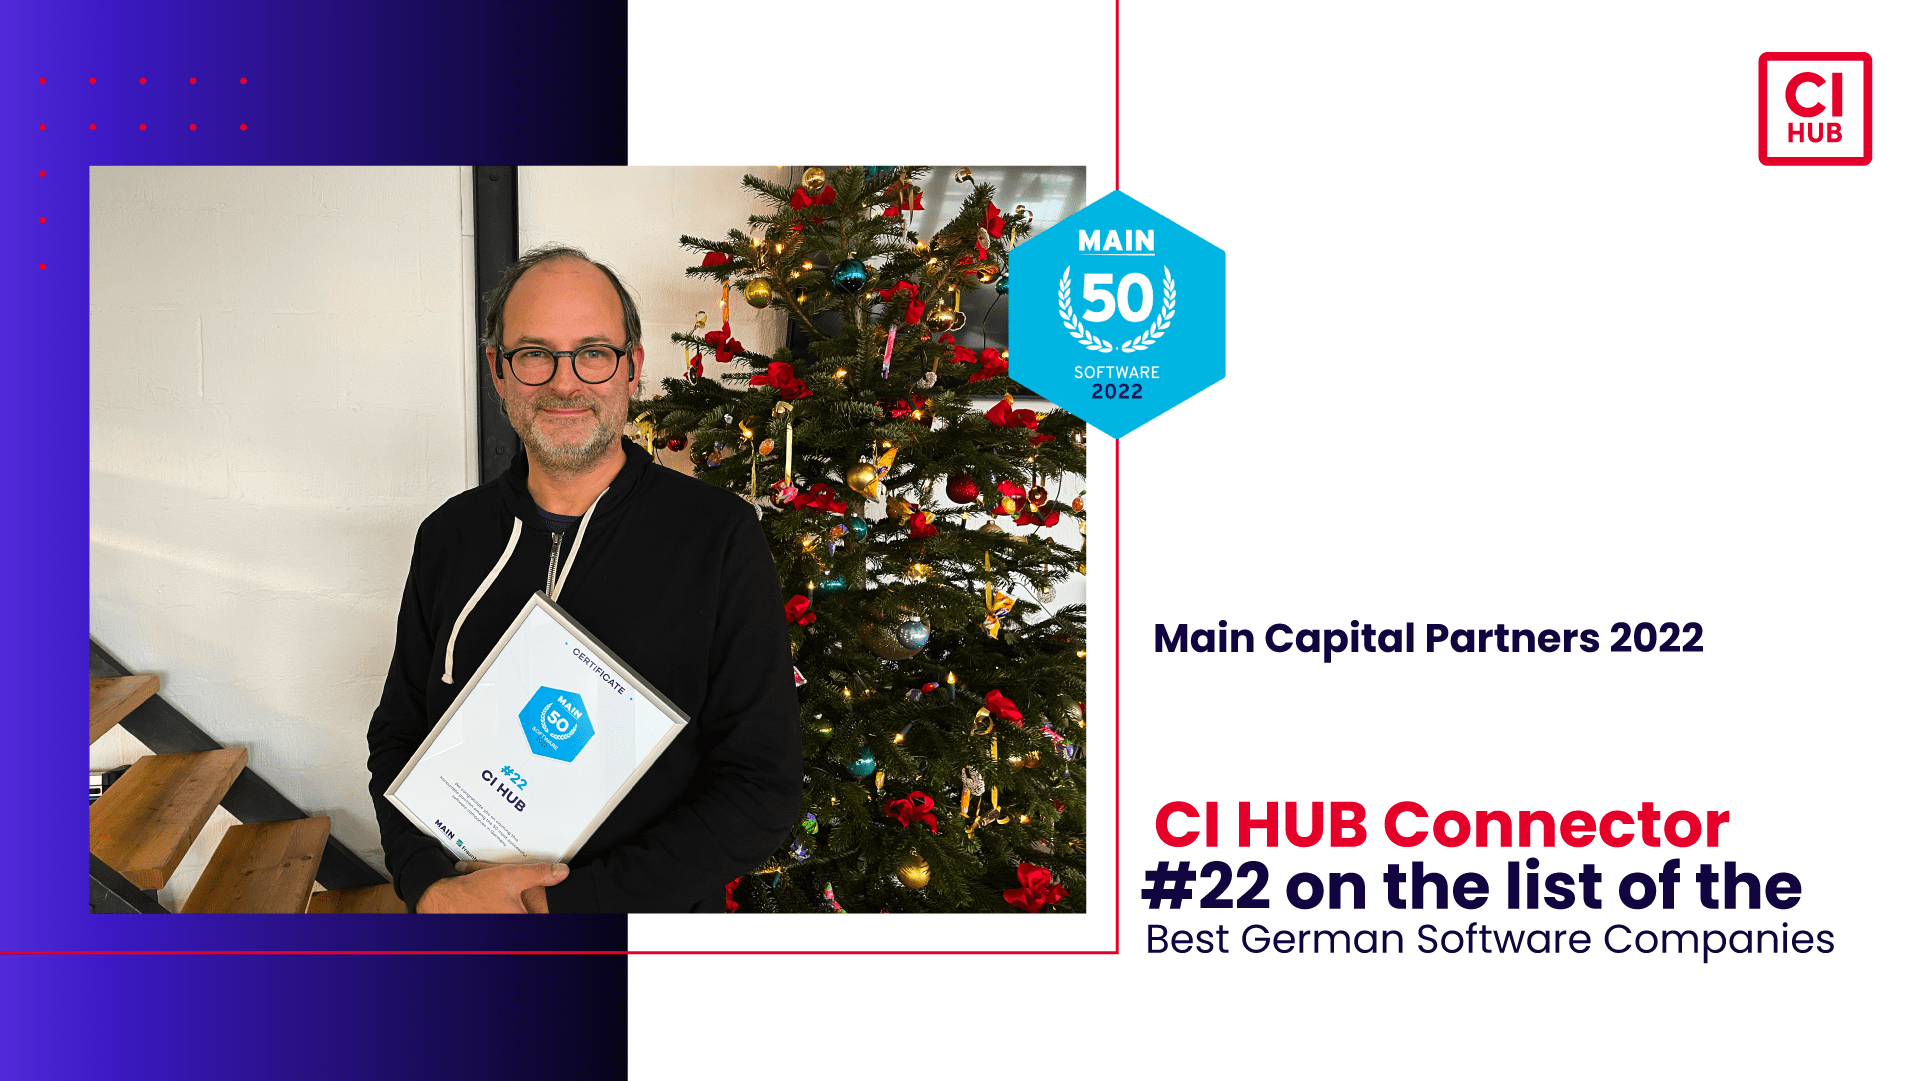 CI HUB is number 22 on the list of the most...